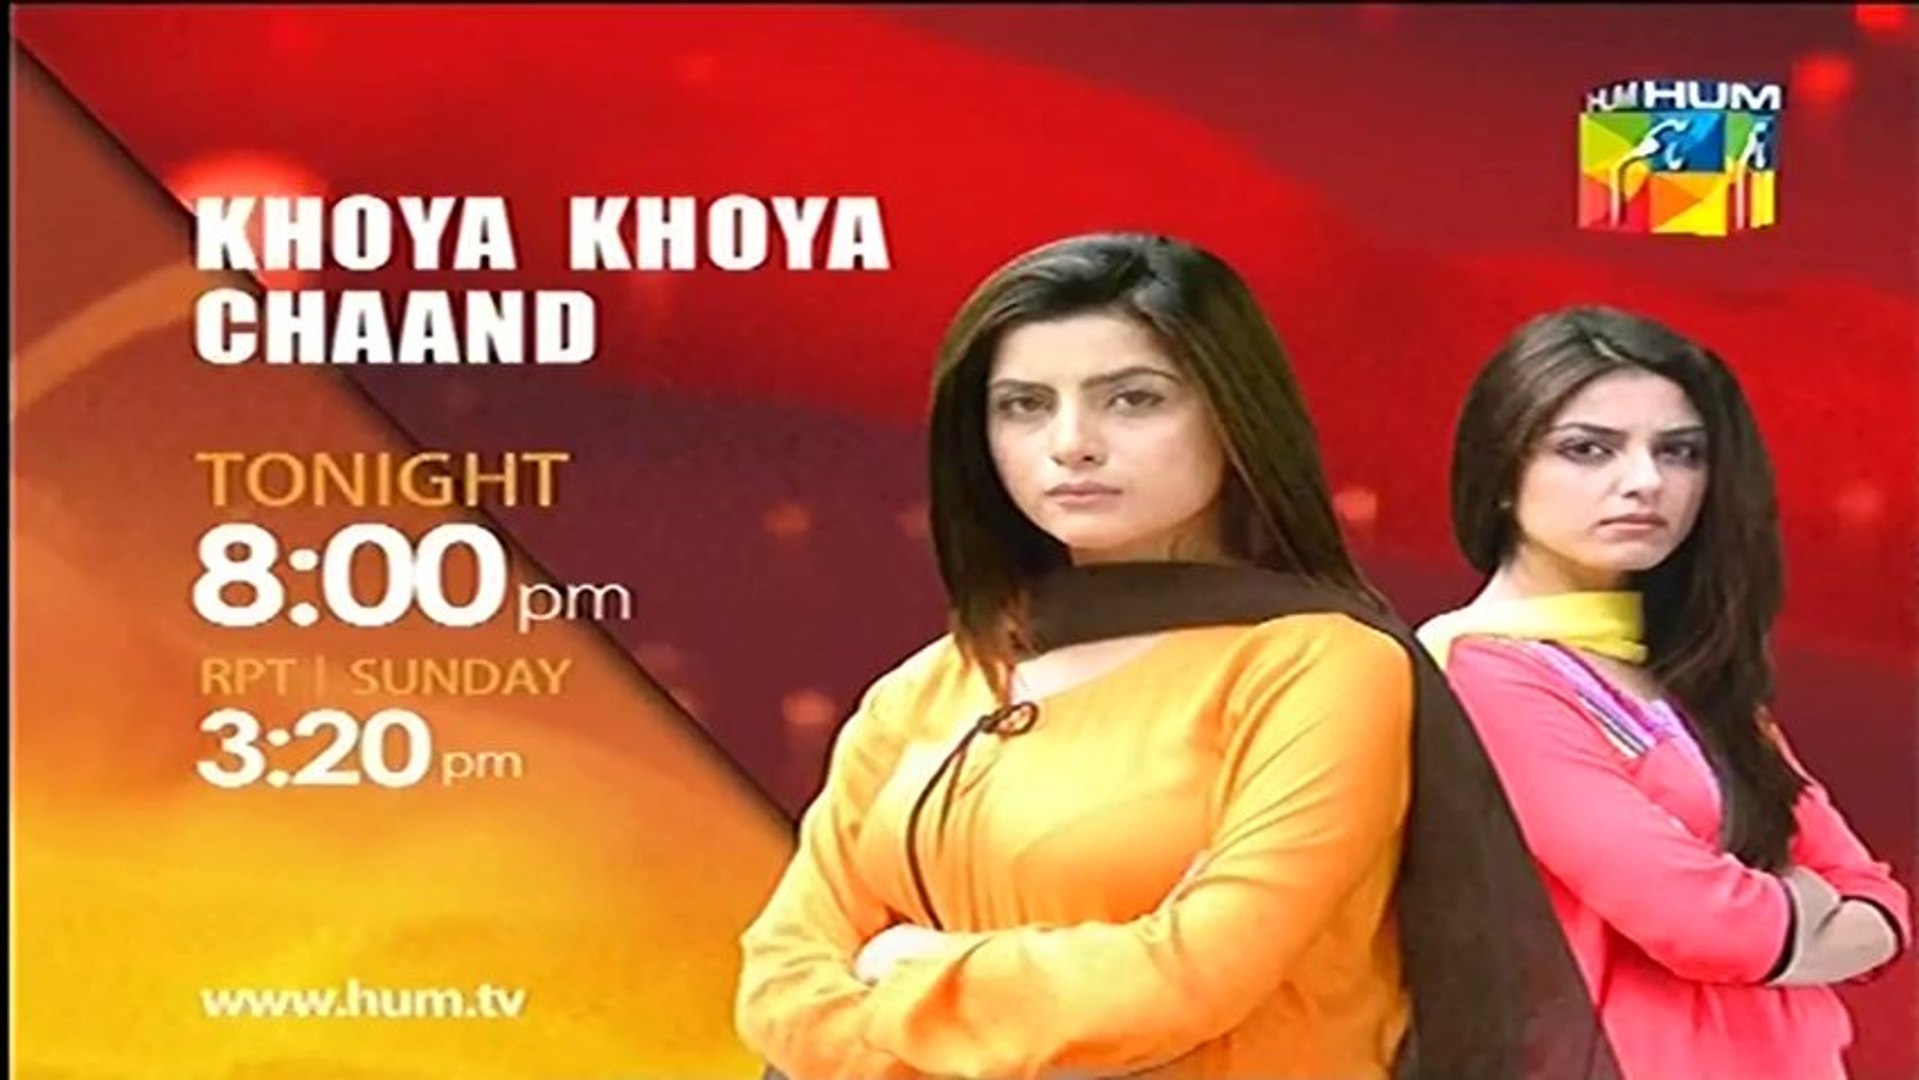 Khoya Khoya Chand is a Pakistani drama serial presented by . It is a novel base drama. The leading role in this drama shoai Ali Abro and Maya Ali. Here We Present Pakistani Drama Khoya Khoya Chand Cast, Story, and Release Date.